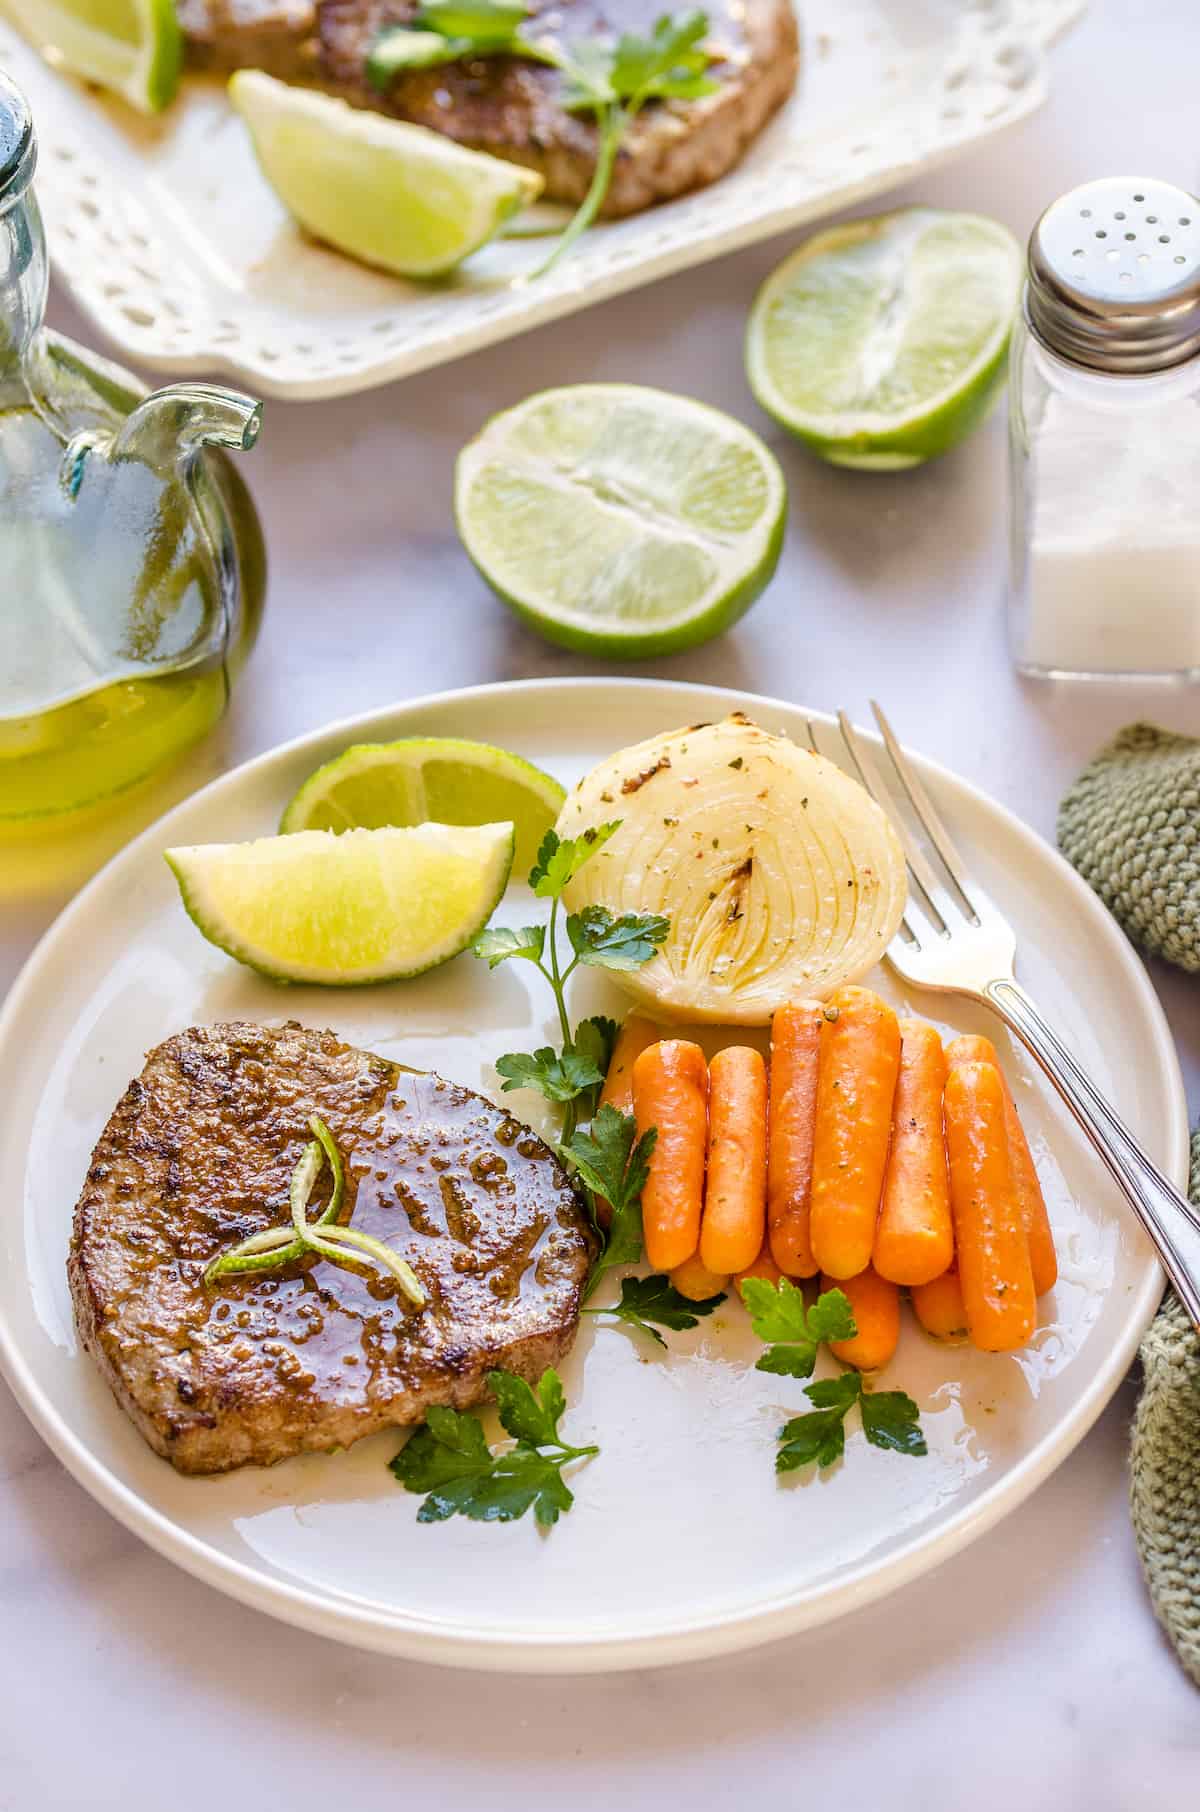 A serving of steak, carrots, and onions on a dinner plate with lime wedges.